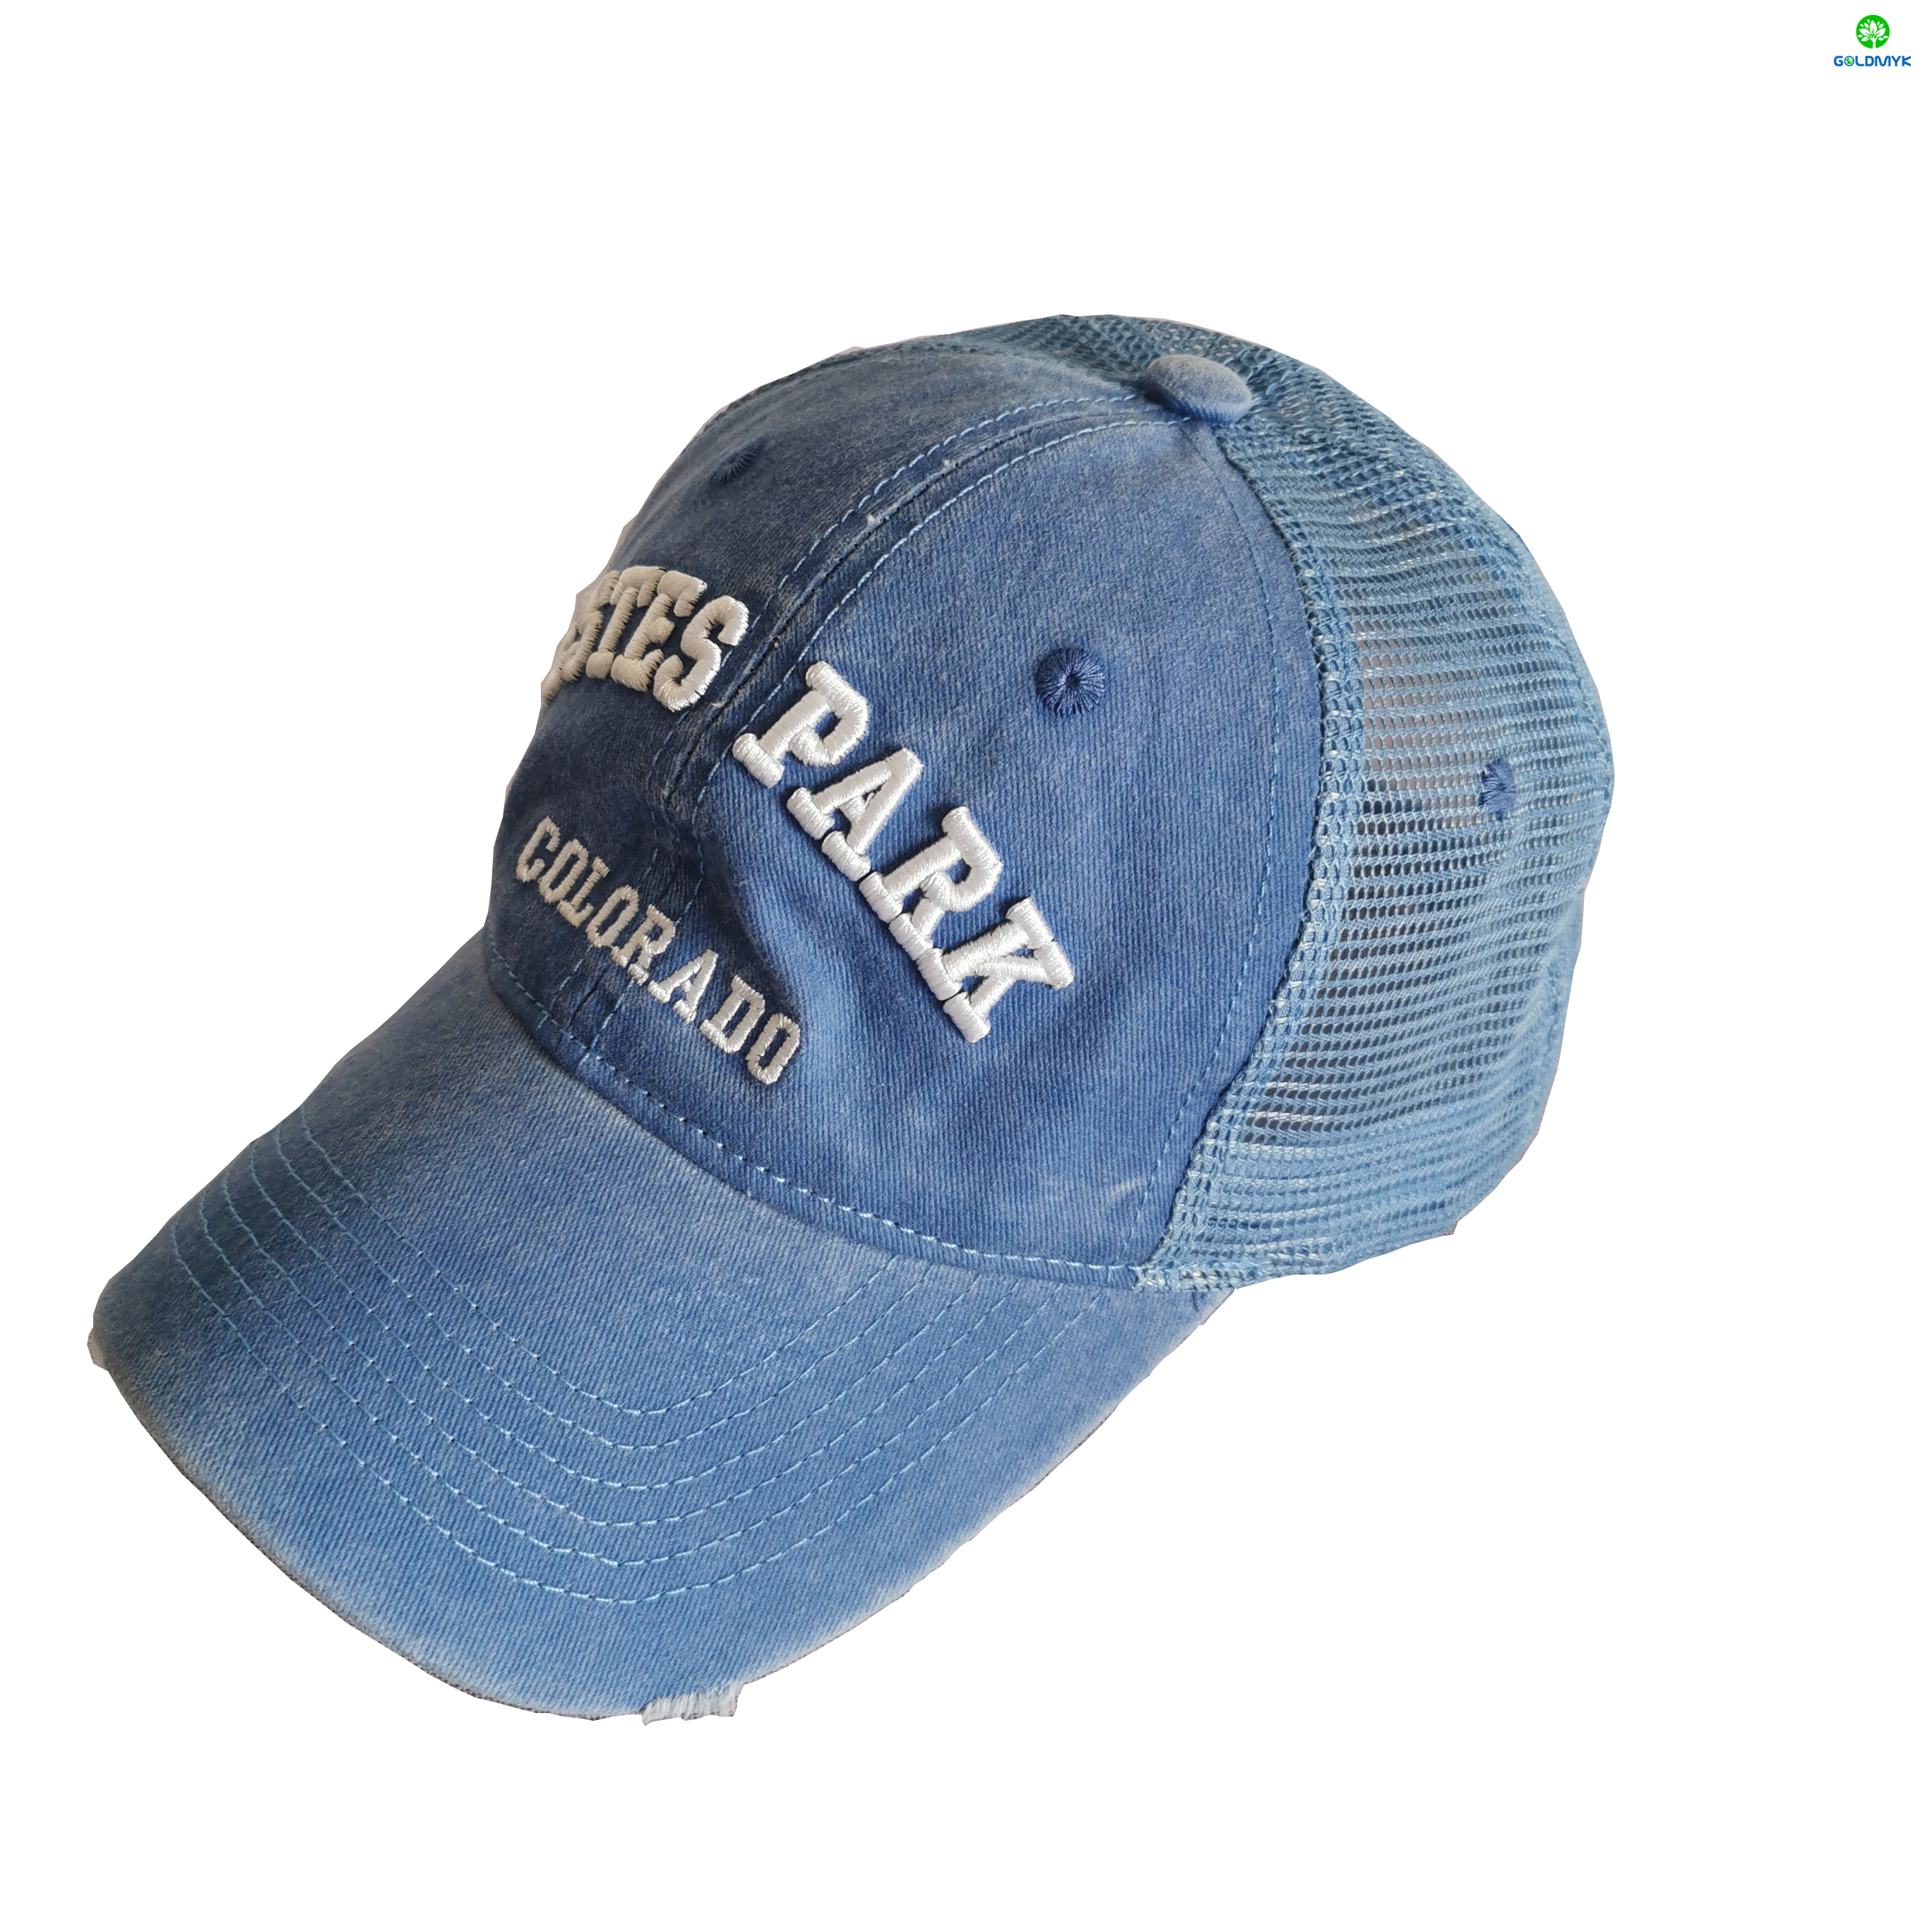 3D Embroidery Pigment Washed Mesh Cap With Distressed Visor